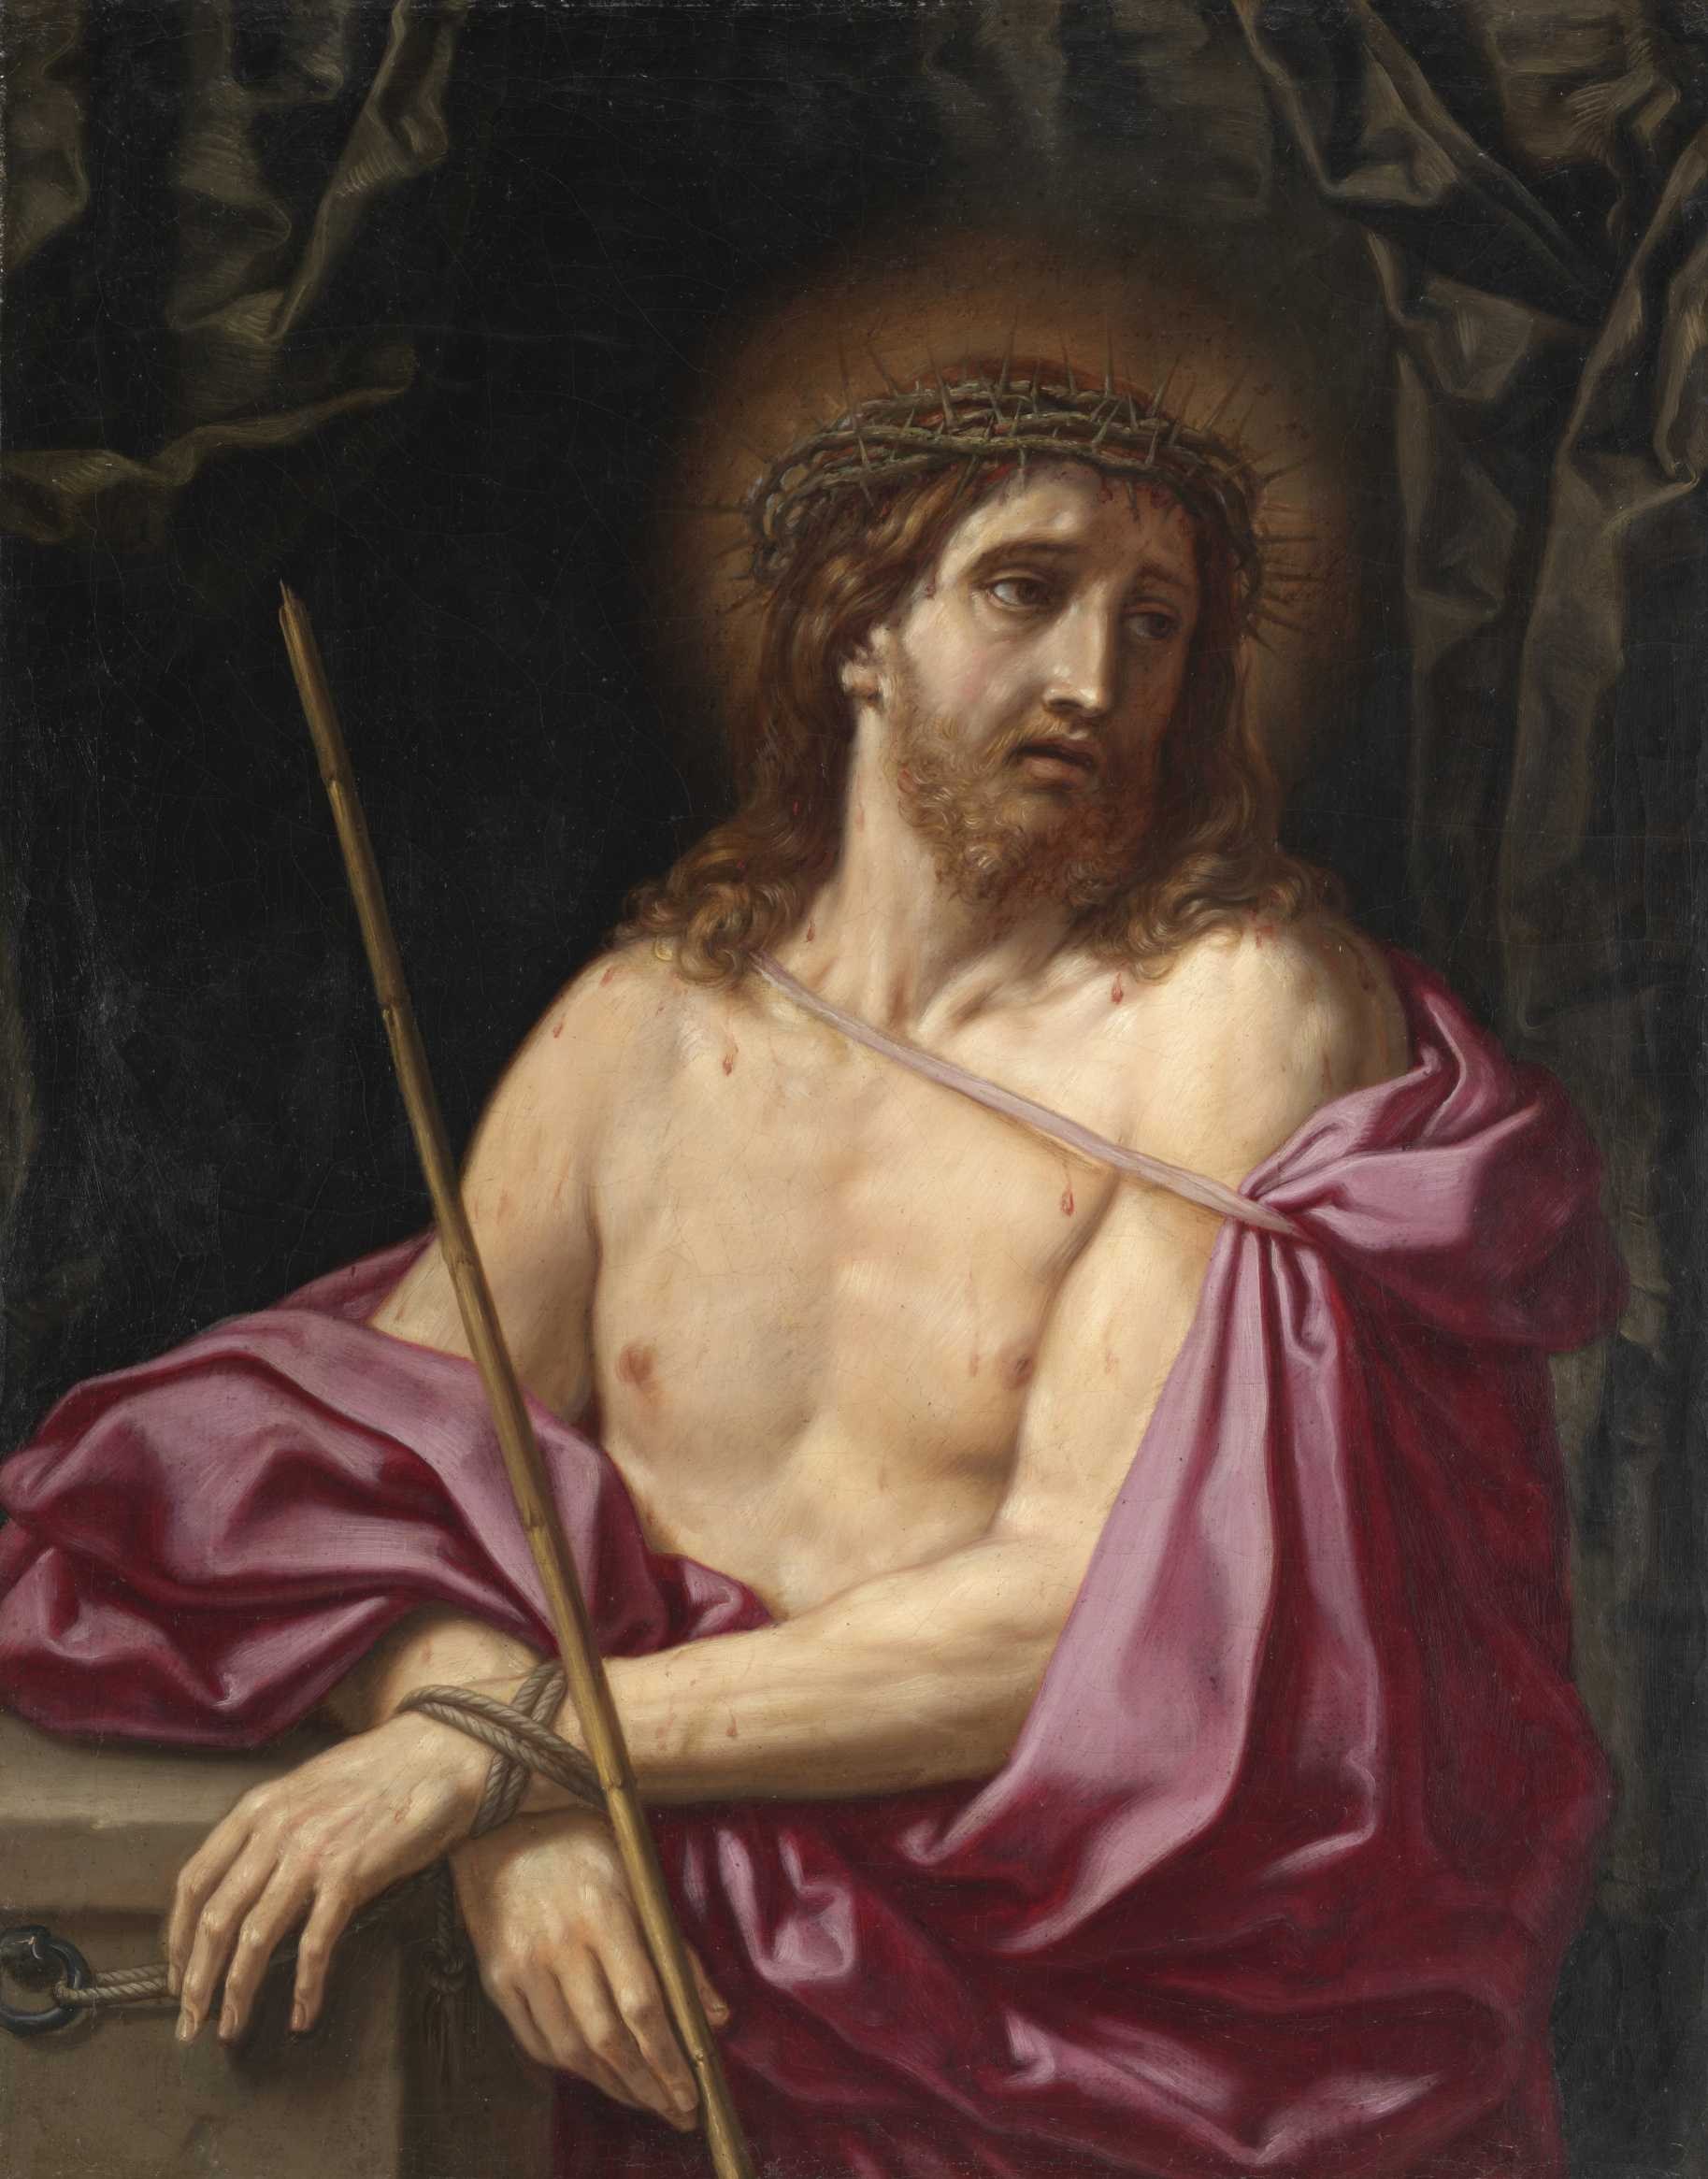 An image of Christ with his wrists bound and crossed in front of him, wearing a crown of thorns. He holds a spear in one hand and looks off to the right with an anguished expression. He has a beard and brown curls that fall to his shoulder, with a faint halo behind his head. He wears a mauve, satin cloth draped around his otherwise nude body.